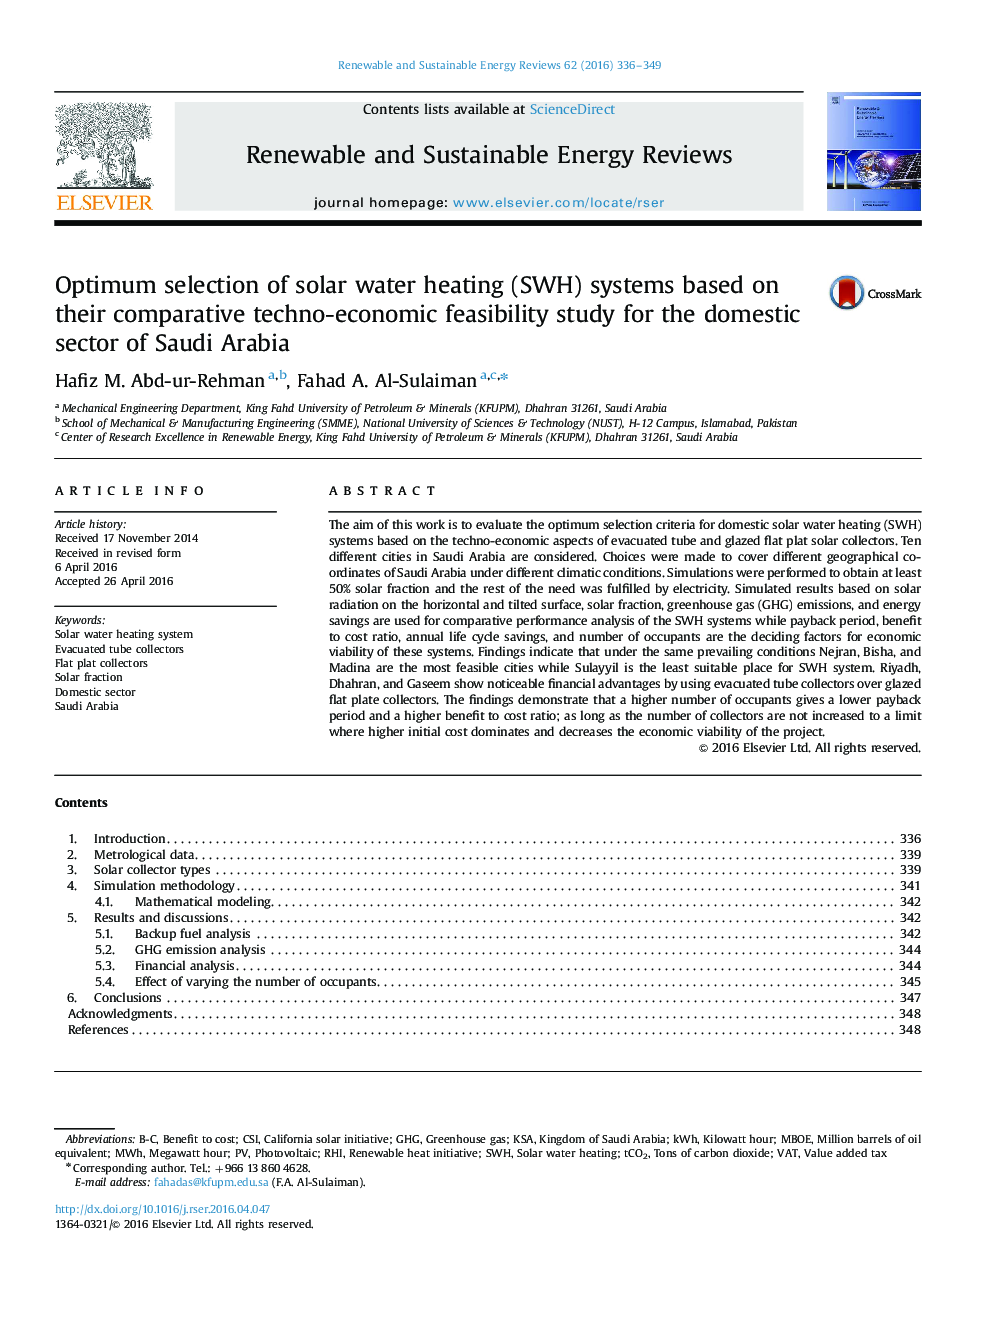 Optimum selection of solar water heating (SWH) systems based on their comparative techno-economic feasibility study for the domestic sector of Saudi Arabia